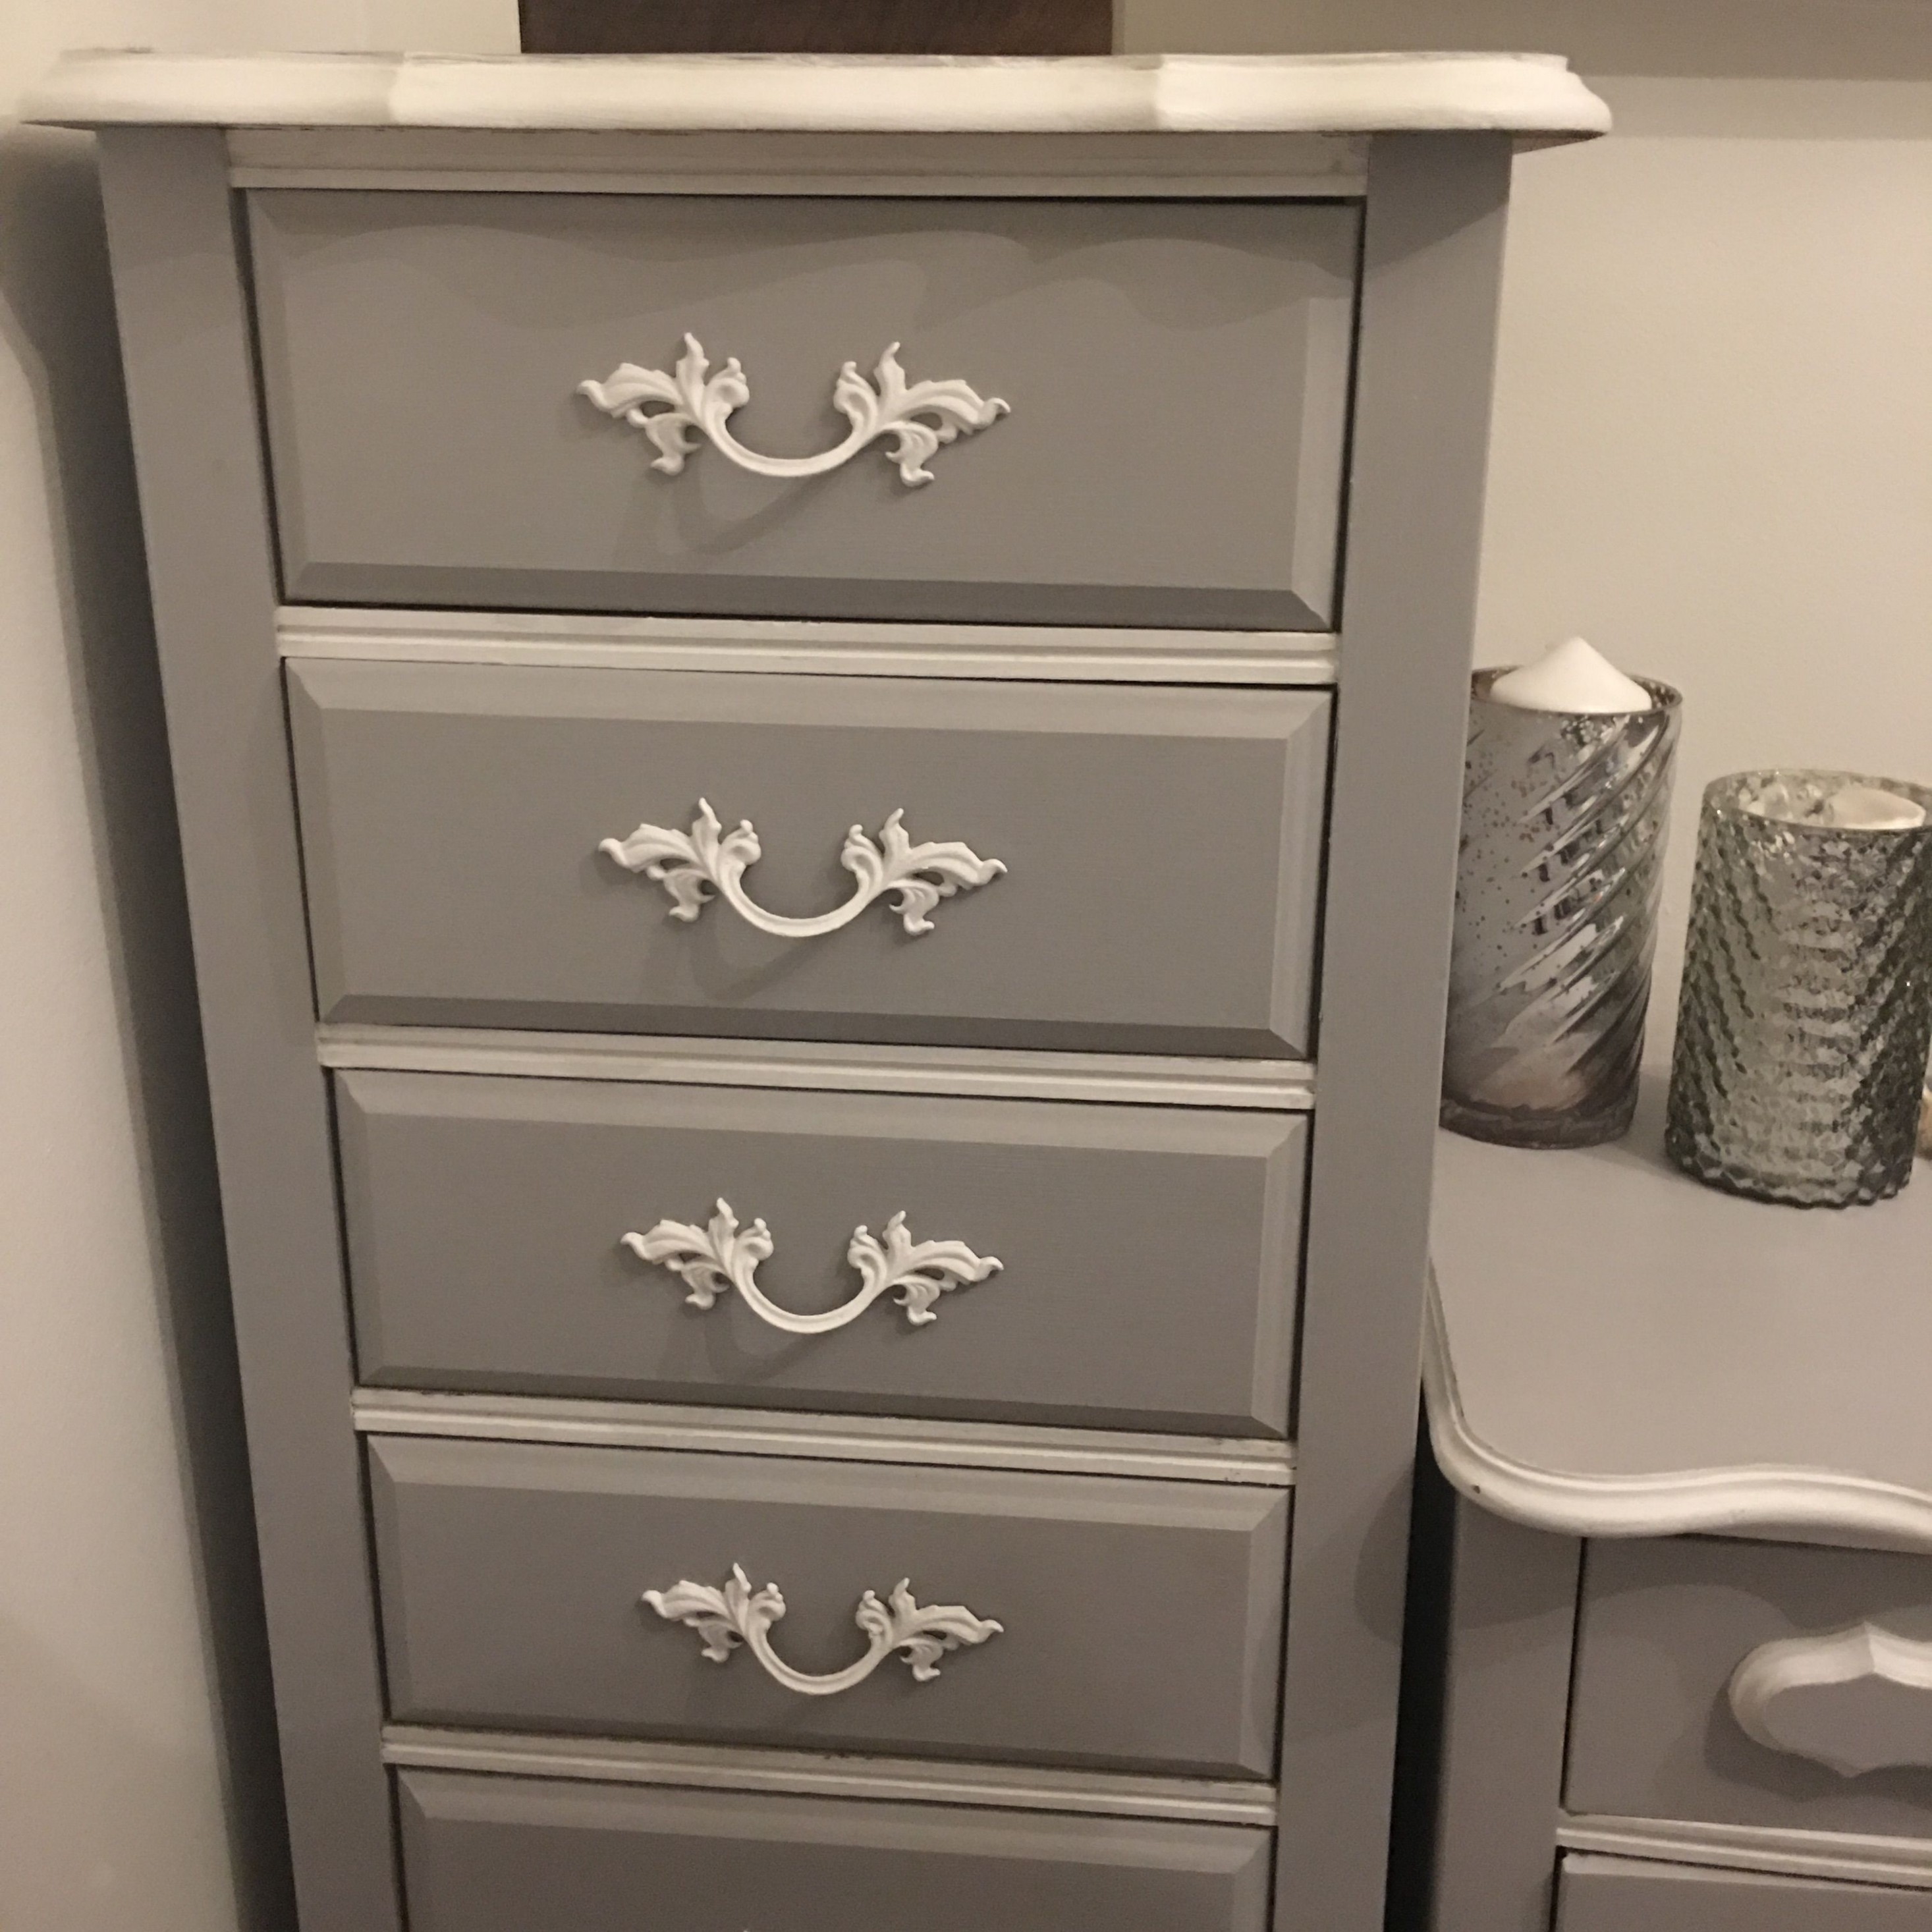 Rustoleum Chalk Paint: Aged Gray And Rustoleum Linen White With ..